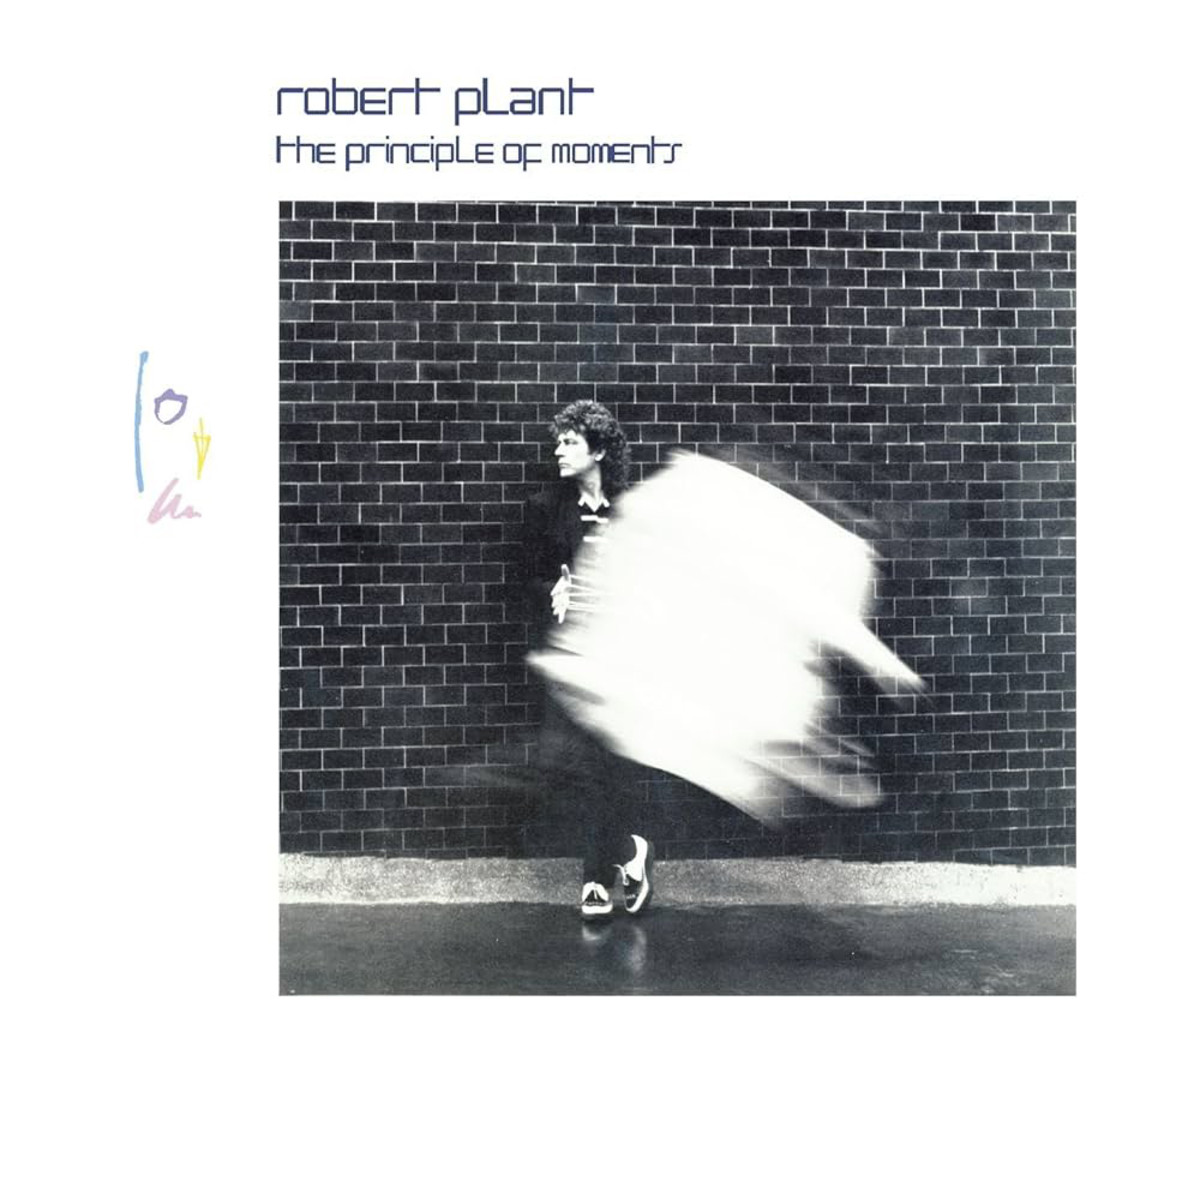 Robert Plant – The Principle of Moments